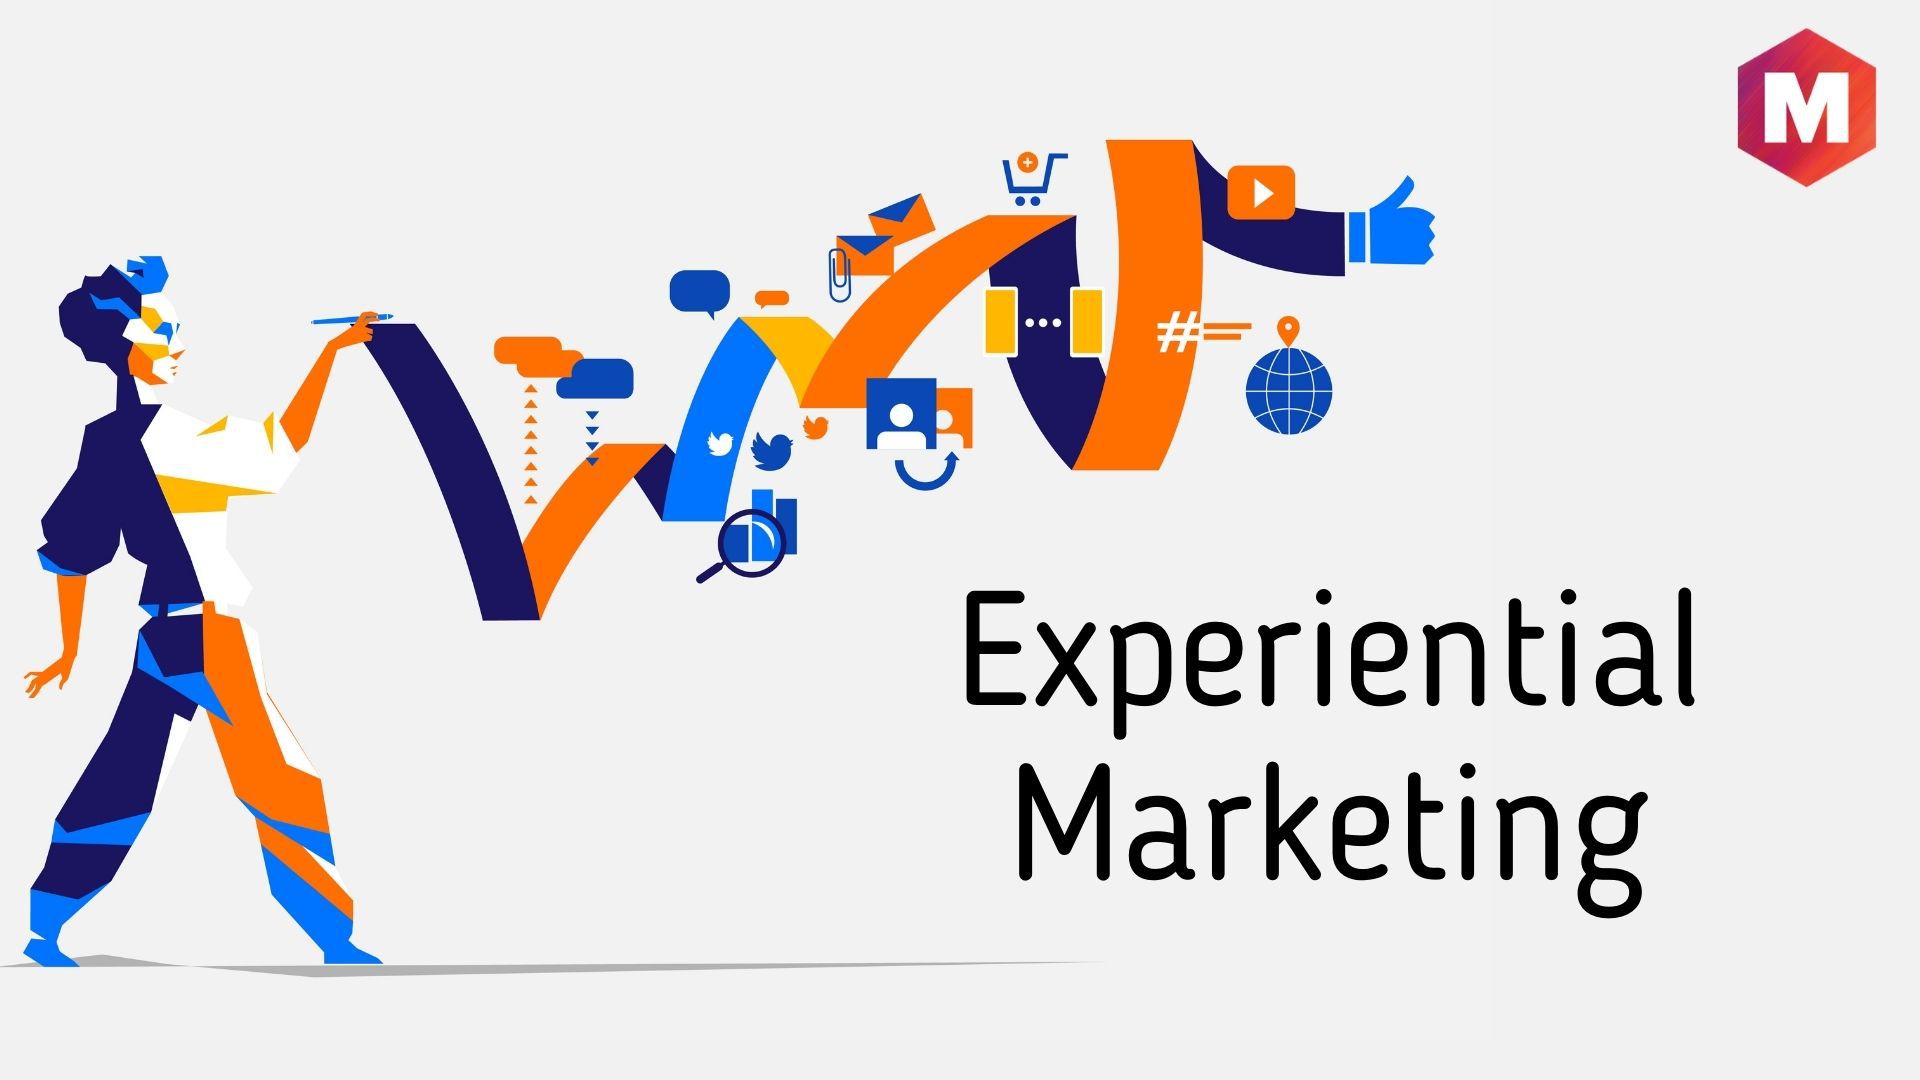 Experiential Marketing - Definition, Meaning, Tips, Elements, Benefits and  Examples | Marketing91